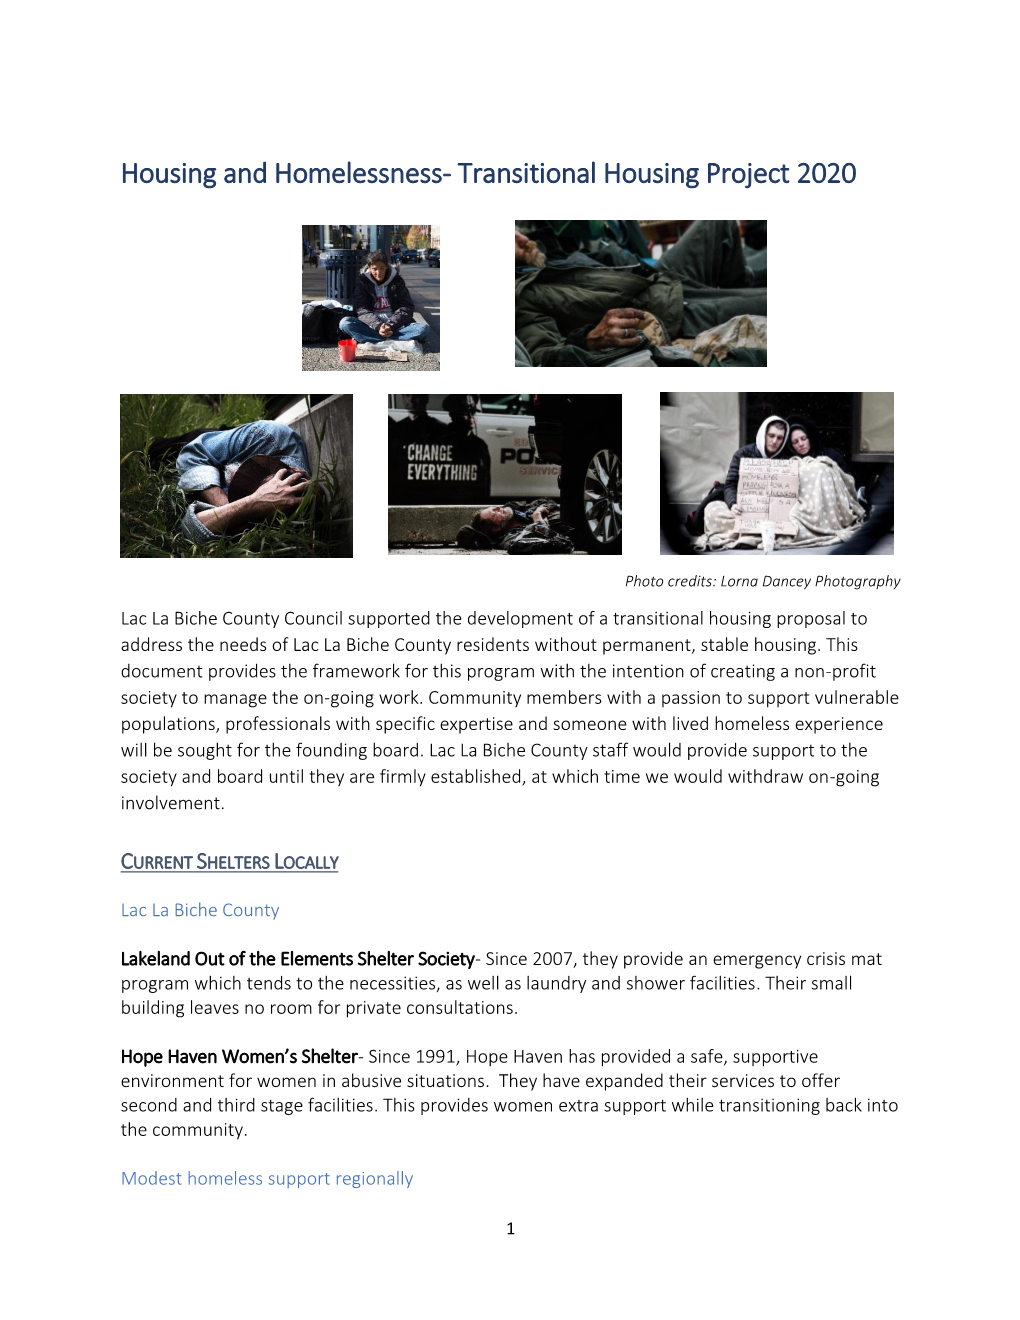 Transitional Housing Project Oct 2020.Docx